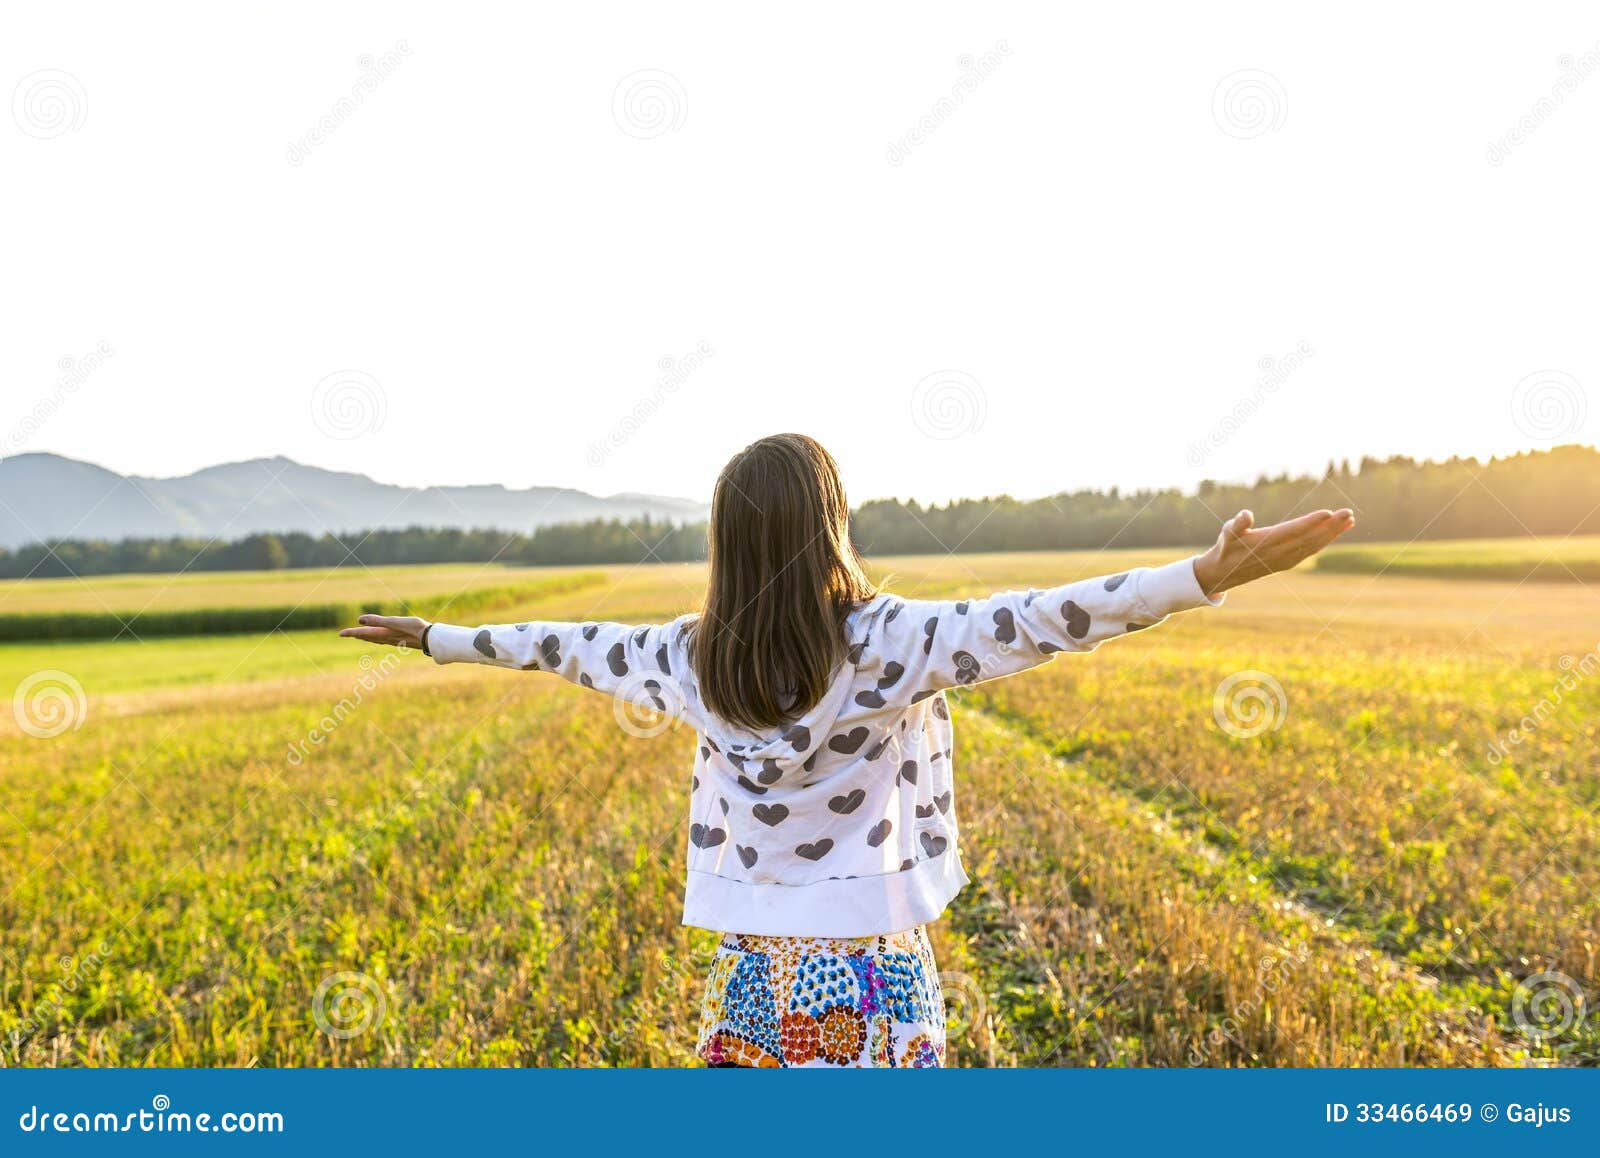 Embracing life stock image. Image of arms, carefree, happiness - 33466469